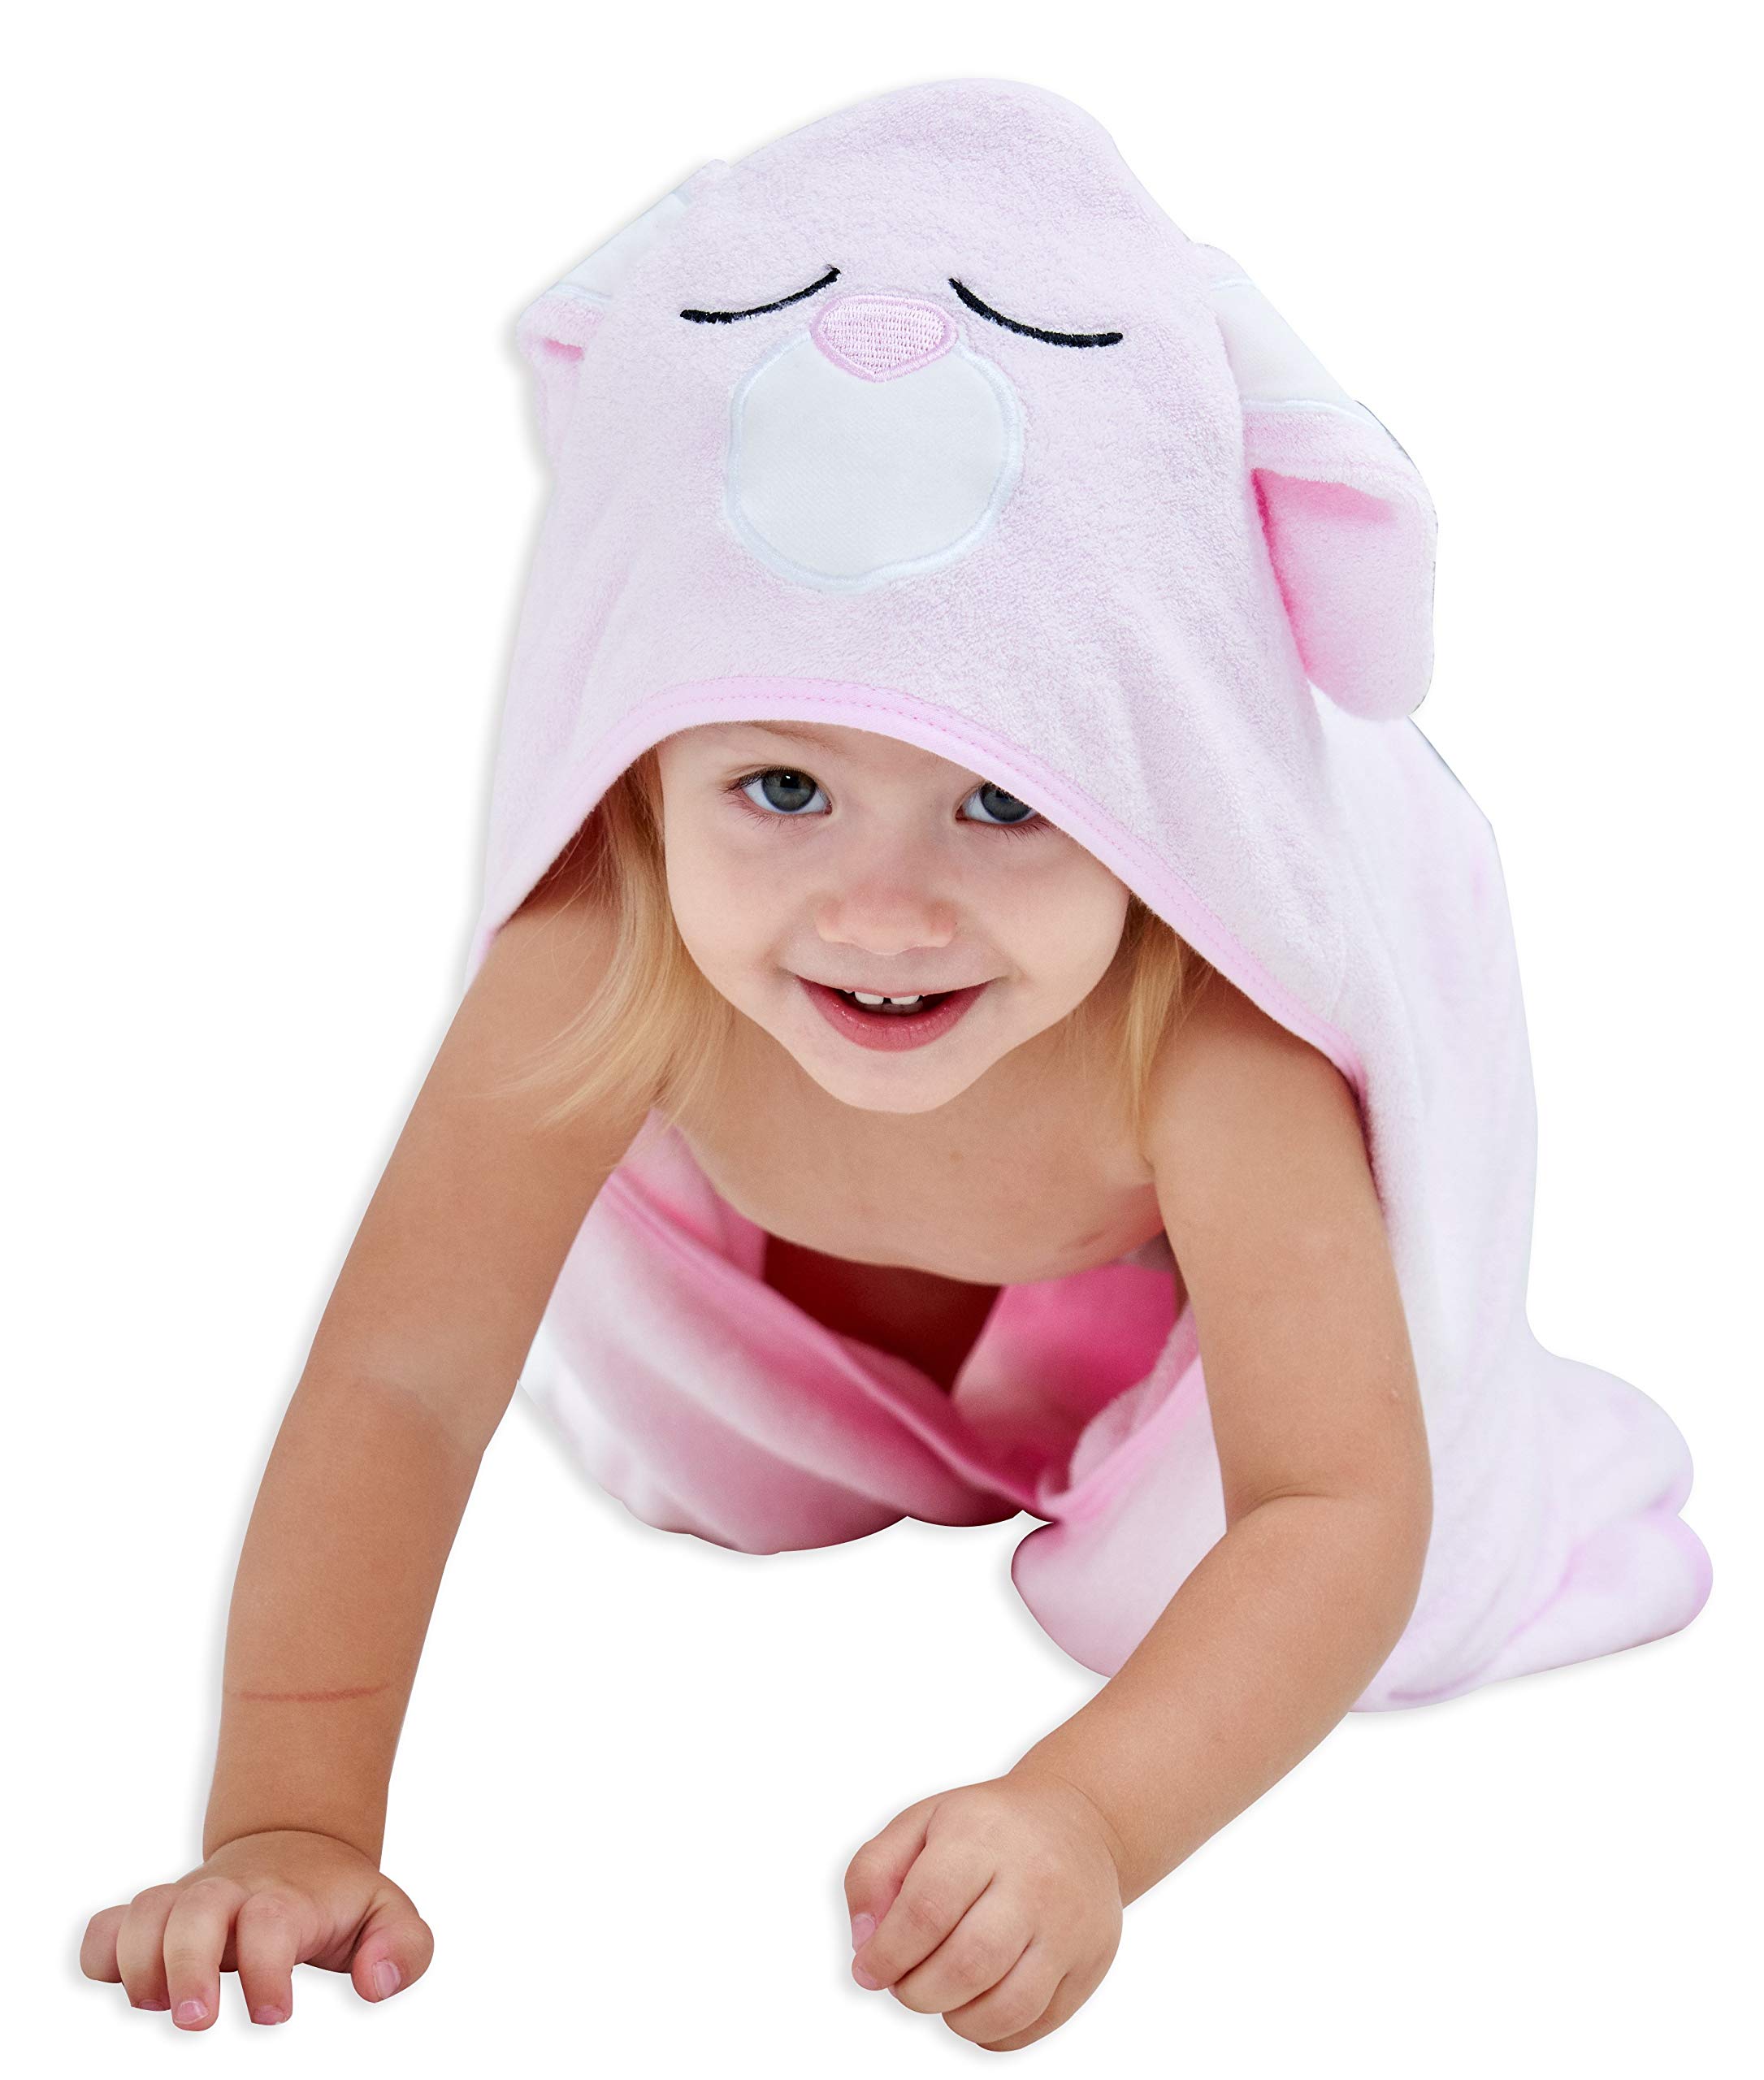 HIPHOP PANDA Baby Washcloths, 6 Pack and Baby Hooded Towel, Pink Rabbit, 37.5 x 37.5 Inch